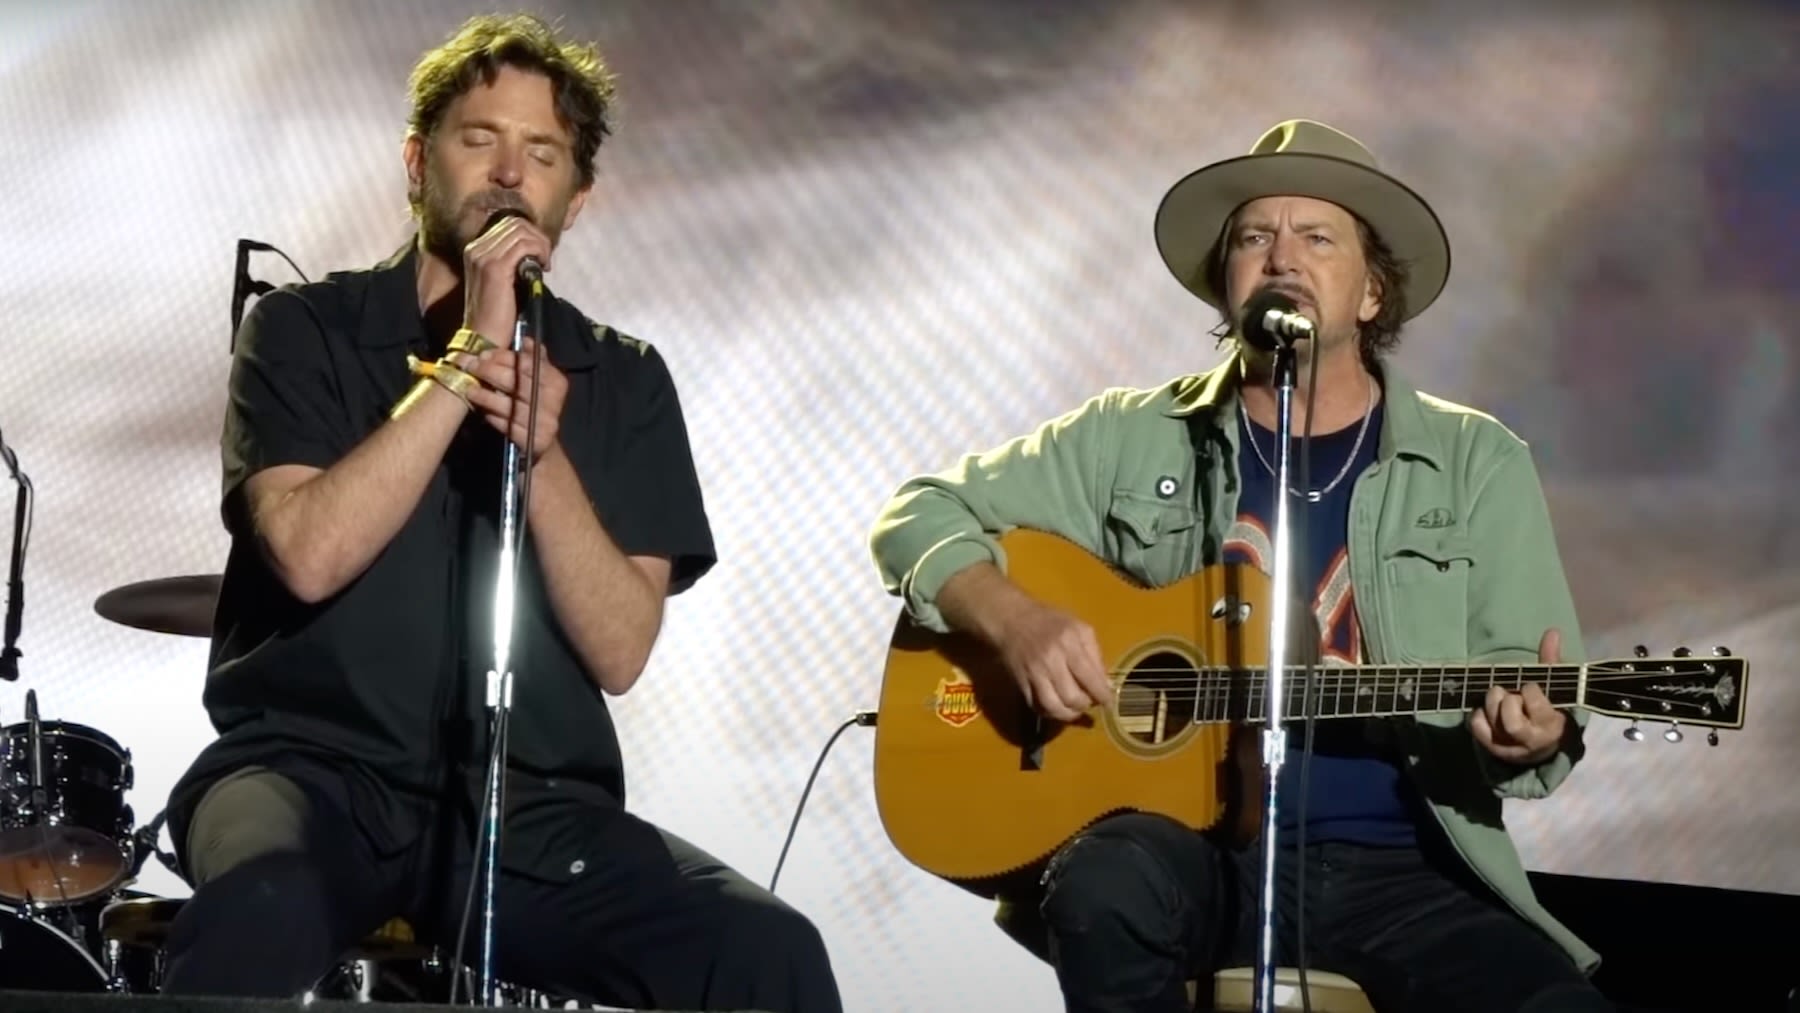 Bradley Cooper Joins Pearl Jam to Sing “Maybe It’s Time” at BottleRock Napa Valley: Watch